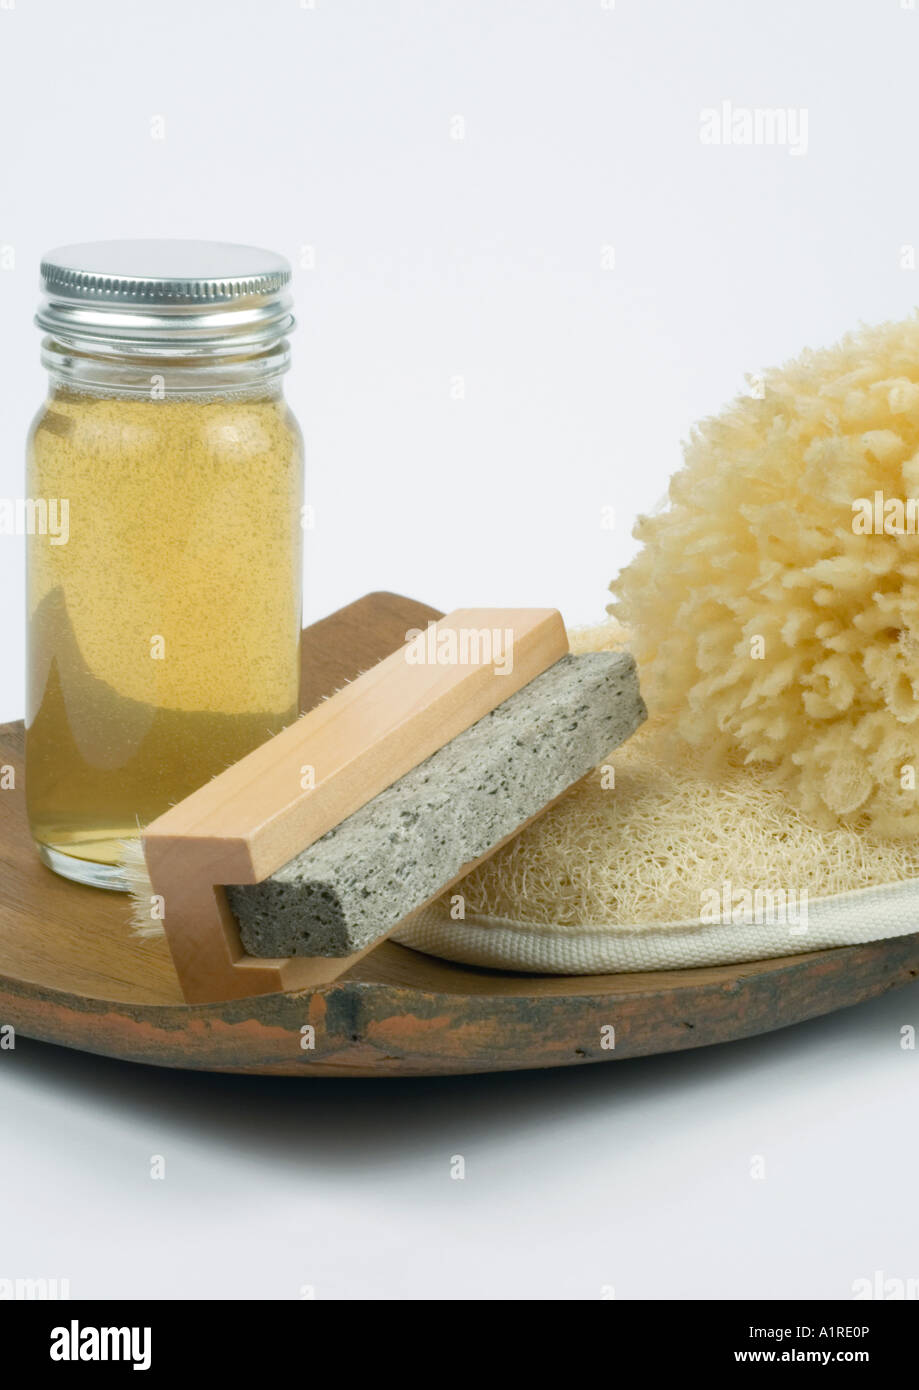 Grooming products, pumice stone, body oil, loofah and sponge on wooden tray Stock Photo